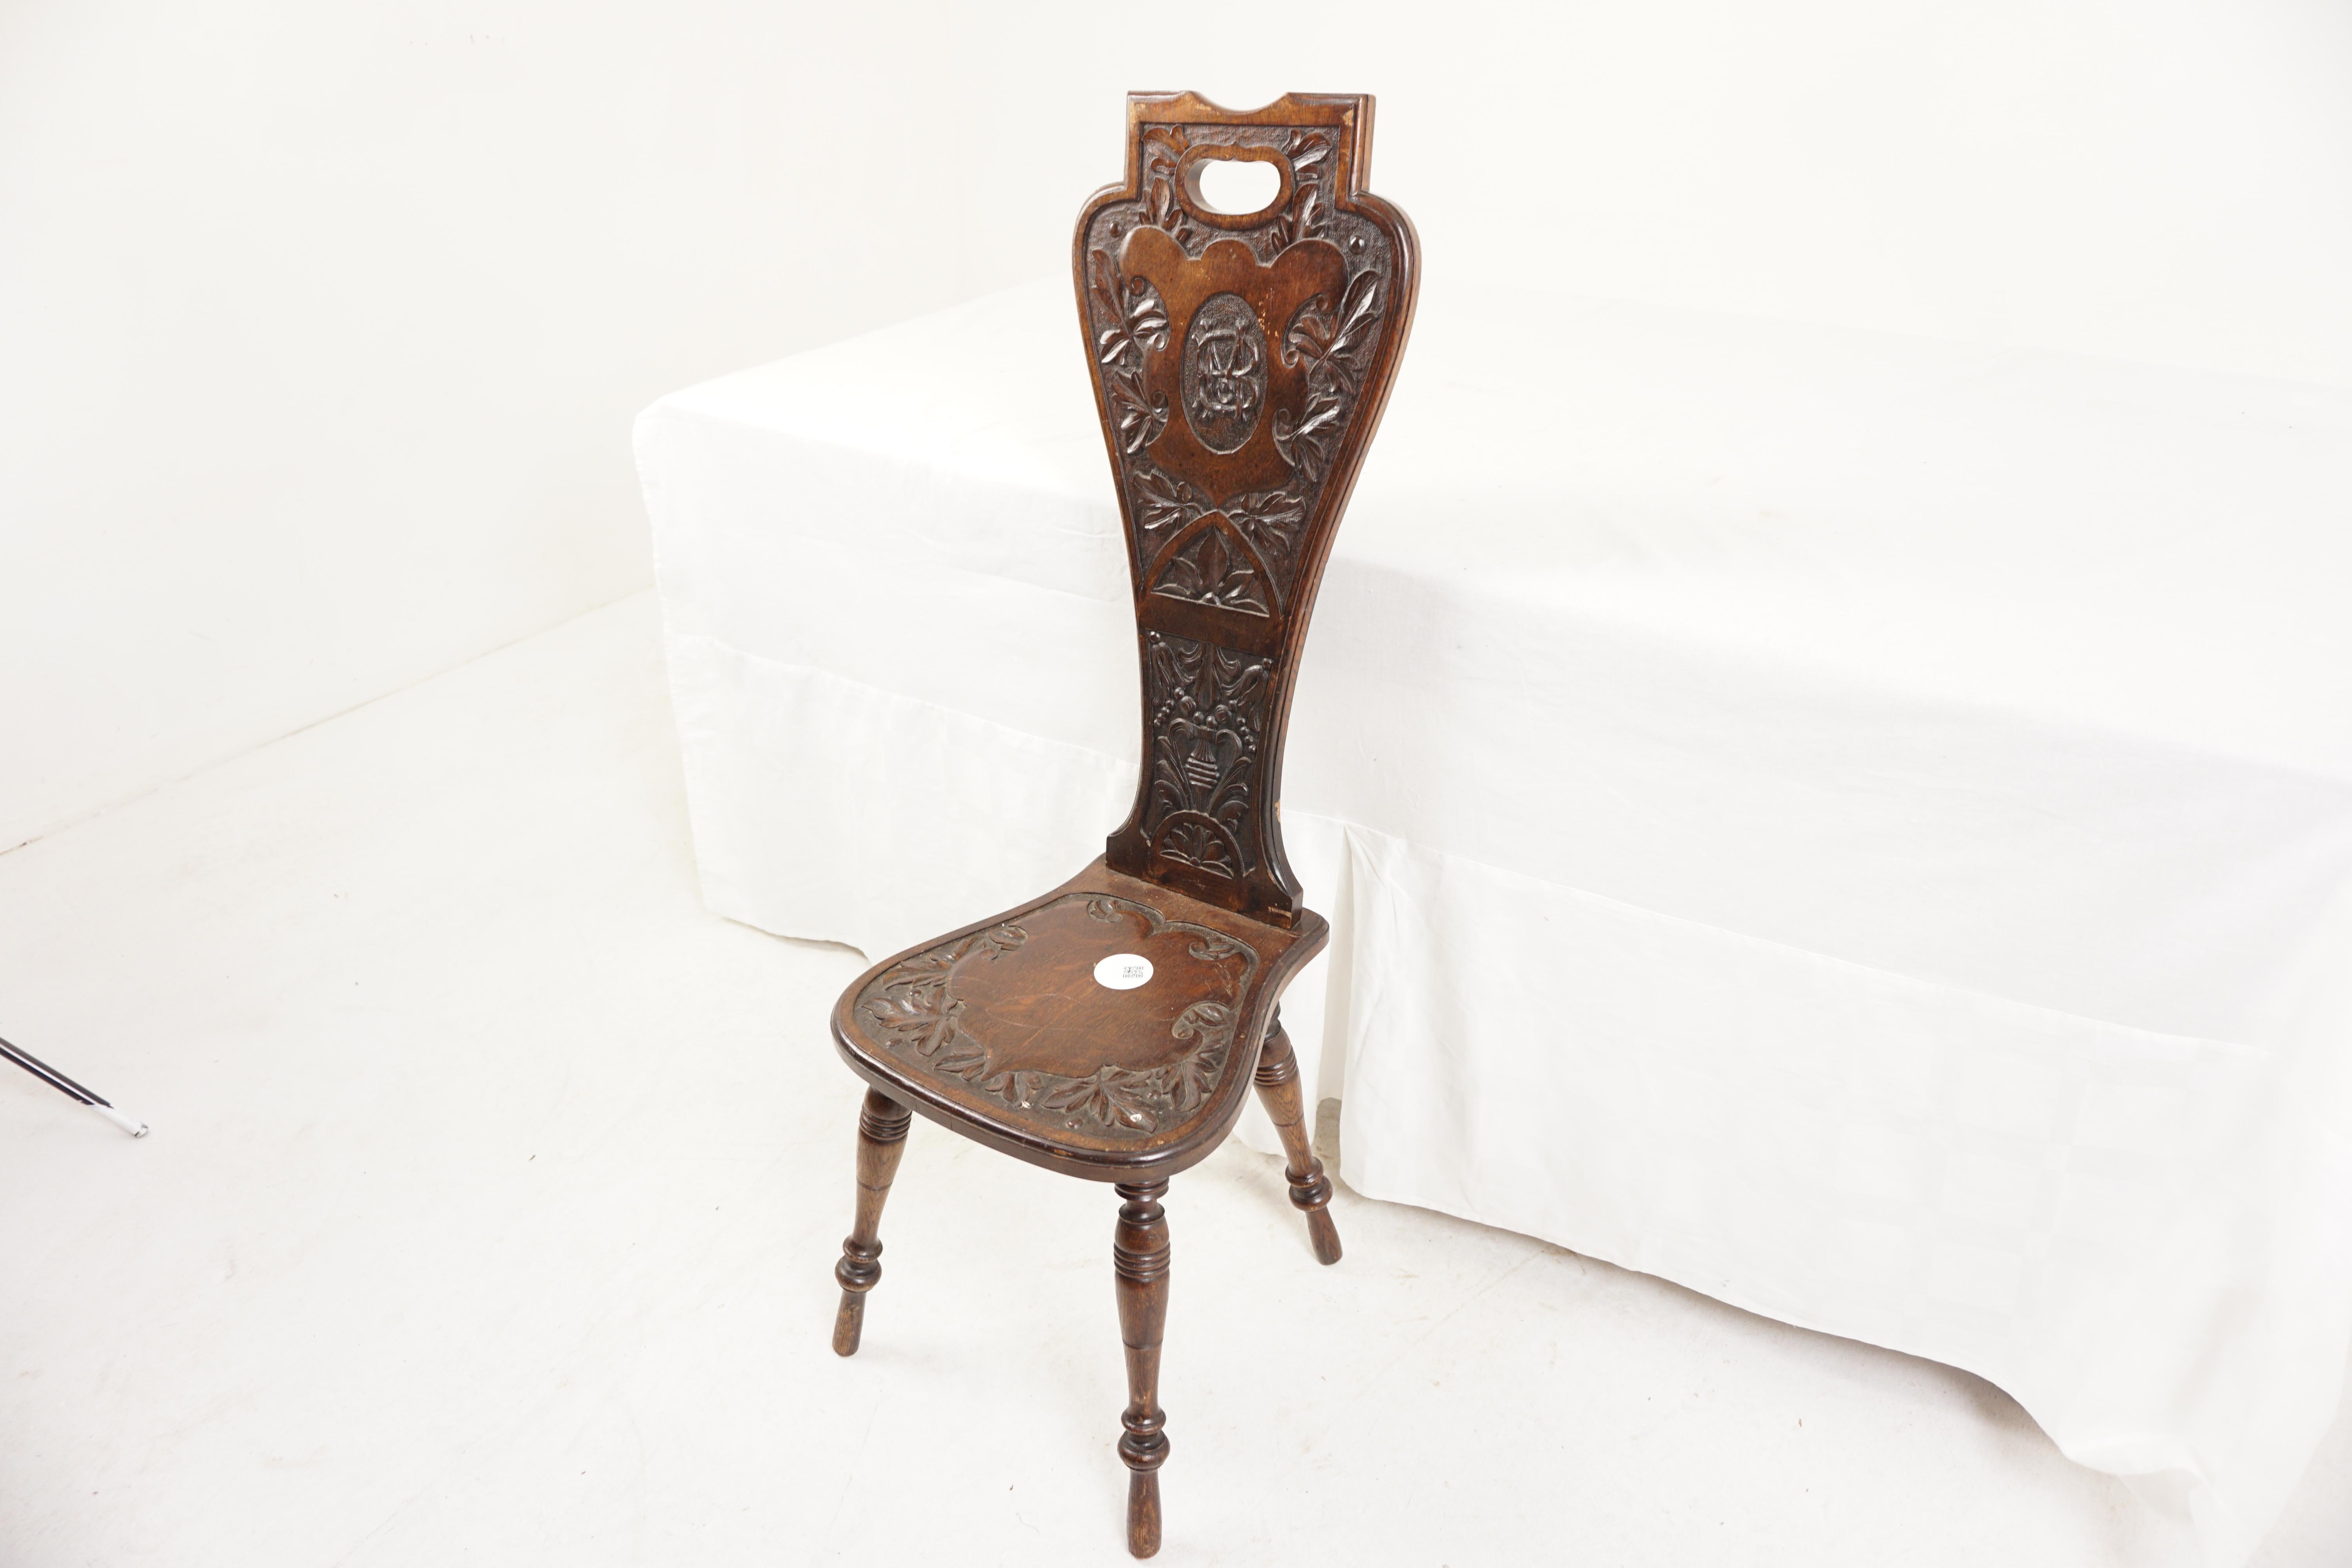 Antique Oak Chair, Tall Carved Oak Spinning Chair, Hall Chair, Antique Furniture, Scotland 1890, H1077

+ Scotland 1880
+ Solid Oak
+ Original finish
+ Has a lovely shaped carved high back 
+ With a cut out back and carved shaped seat
+ All